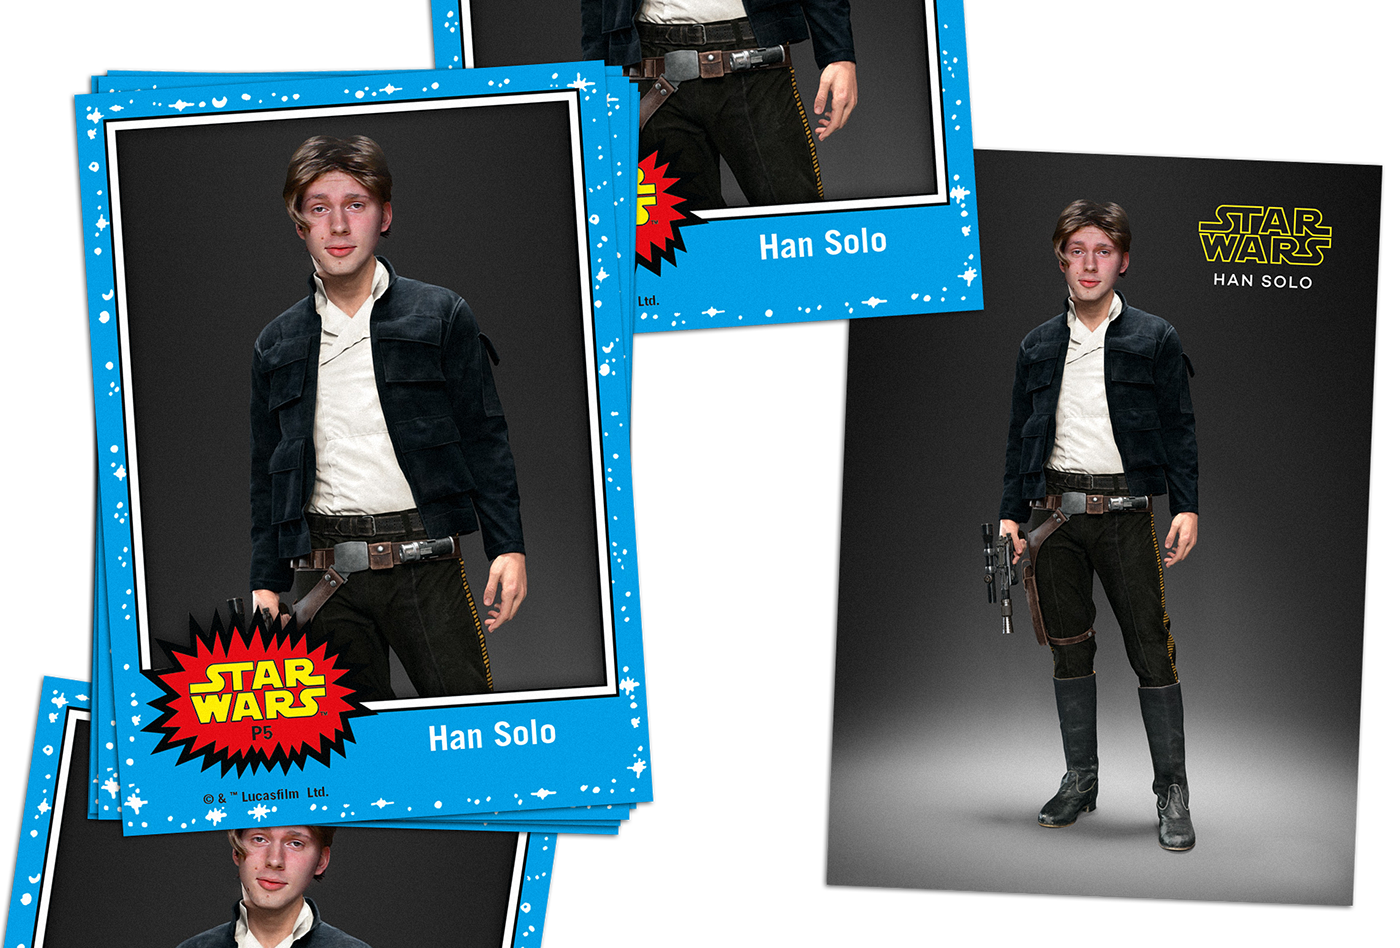 star Wars Supercut   han solo Project Fun Chewbacca remake Fanfilm acting costume